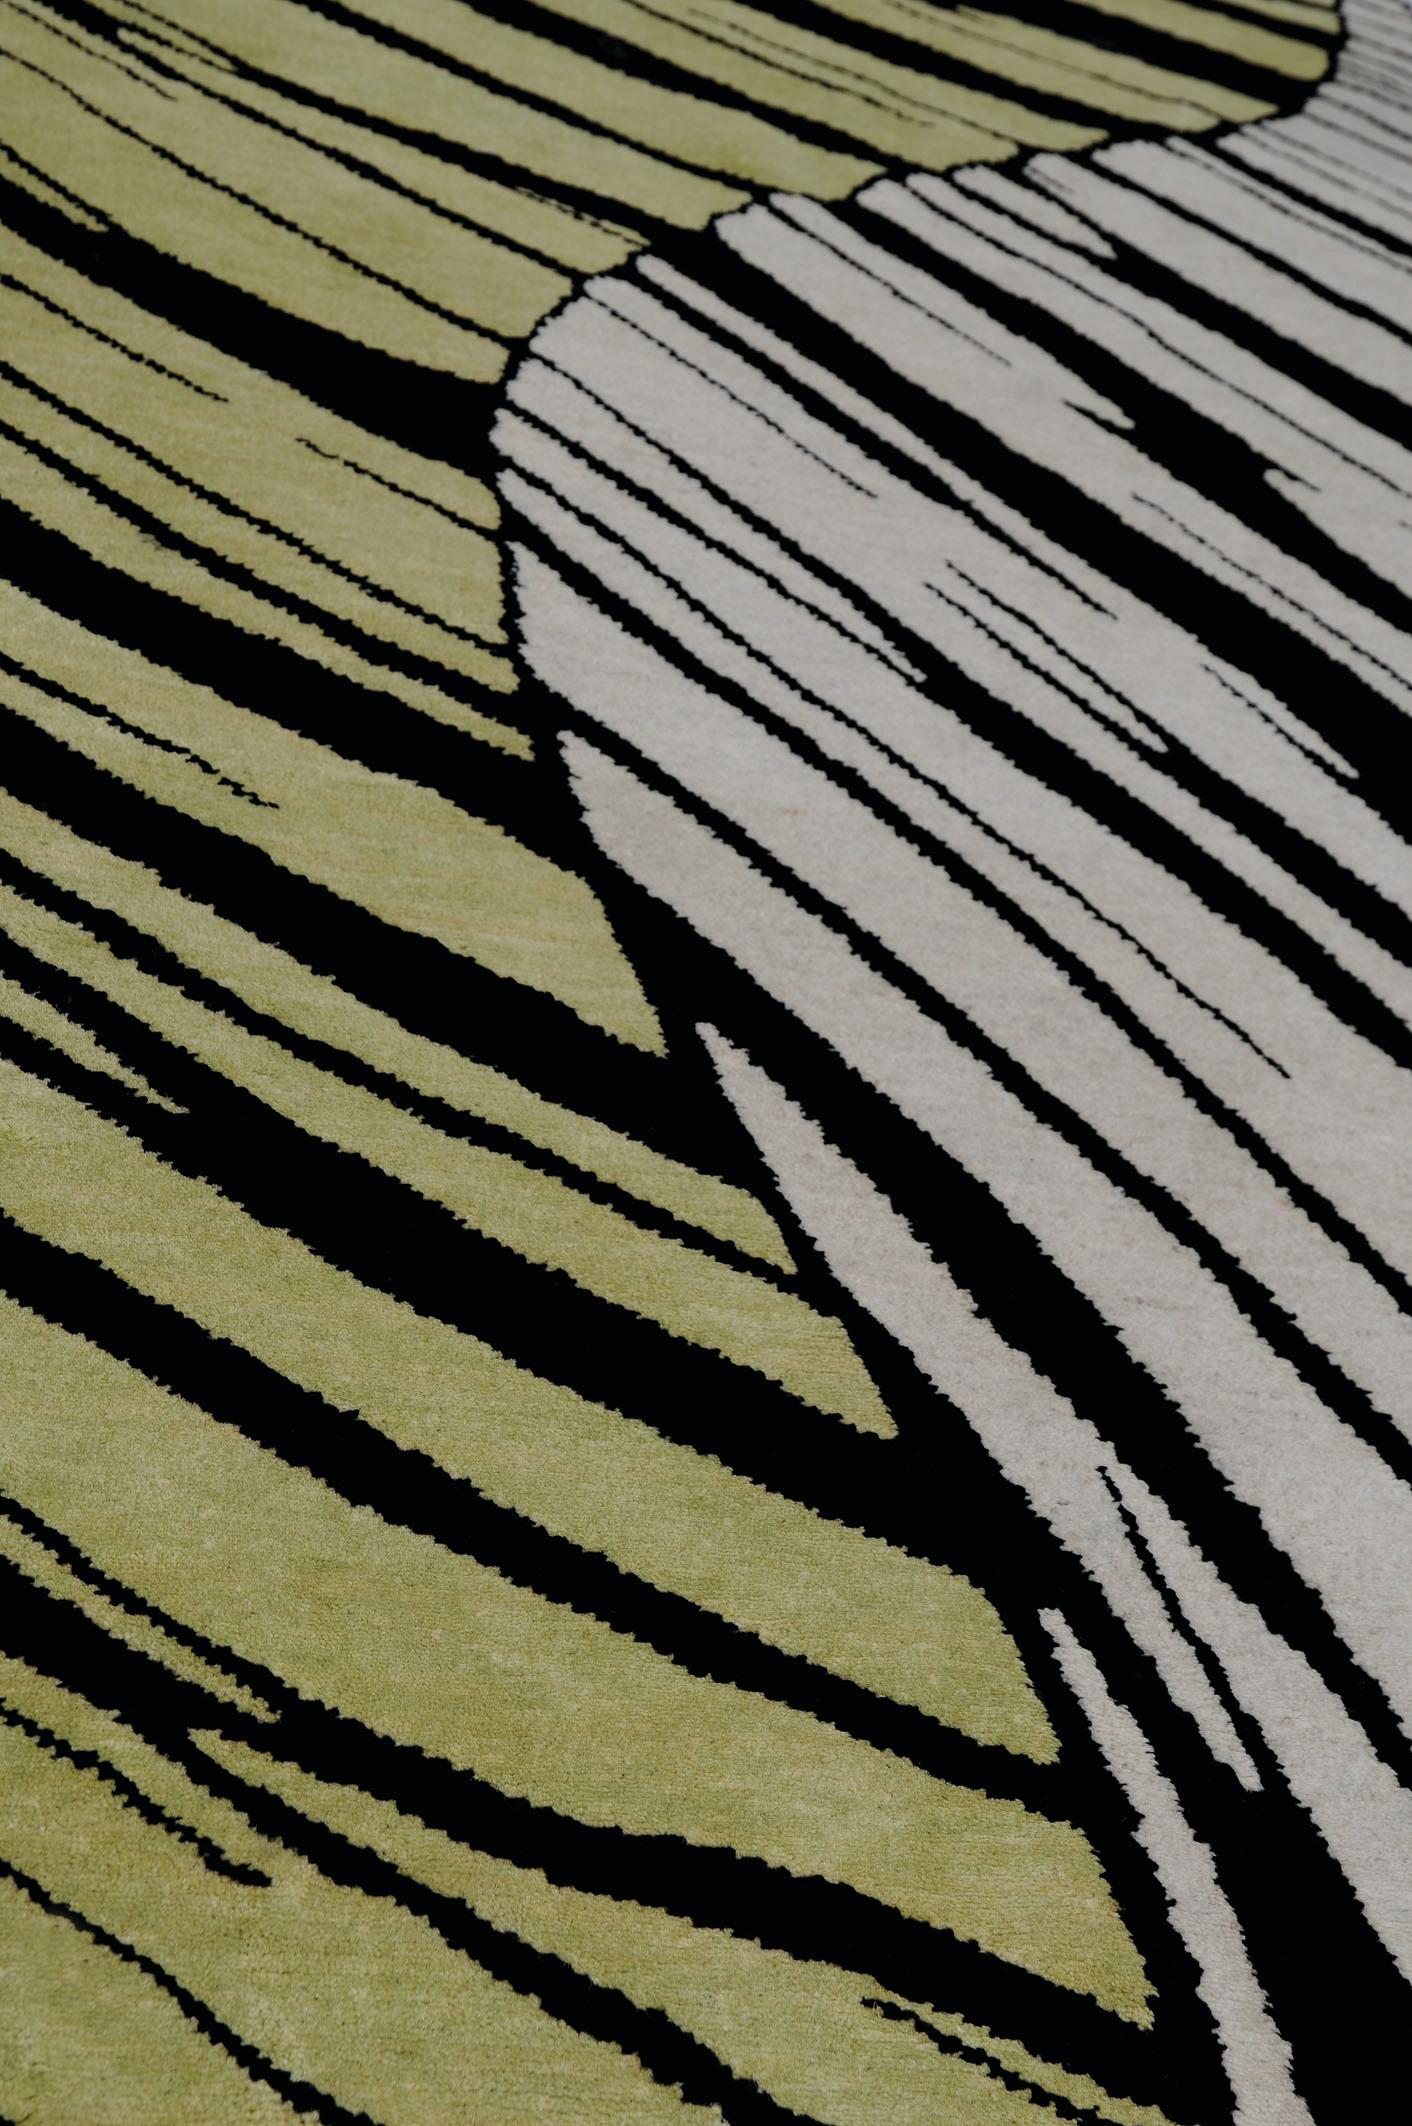 Hidden Tiger - Setsu & Shinobu Ito Modern Design Rug Carpet Wool Viscose Cotton Handknotted

'Wild Furs' is a rugs project with a theme: the coat of a wild animal, combined, with references from todays culture and rites. Several designers and